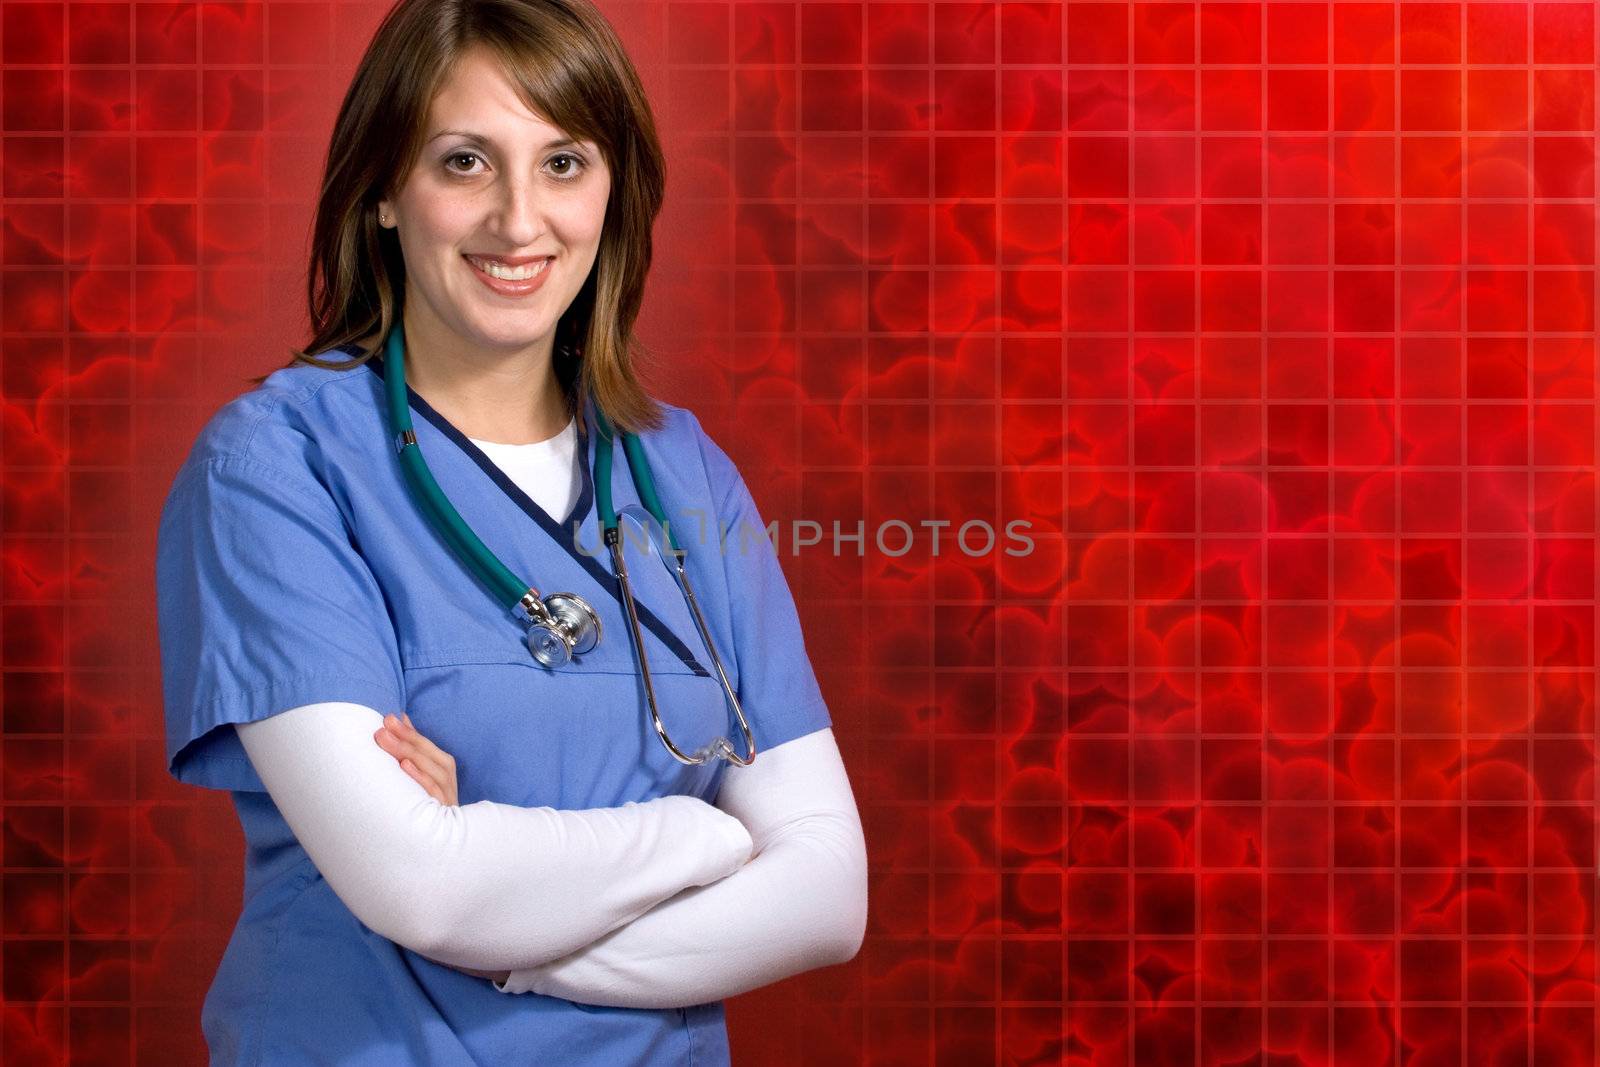 A smiling nurse or doctor over a background made up of red 3D cells.  Plenty of copy-space for your text.